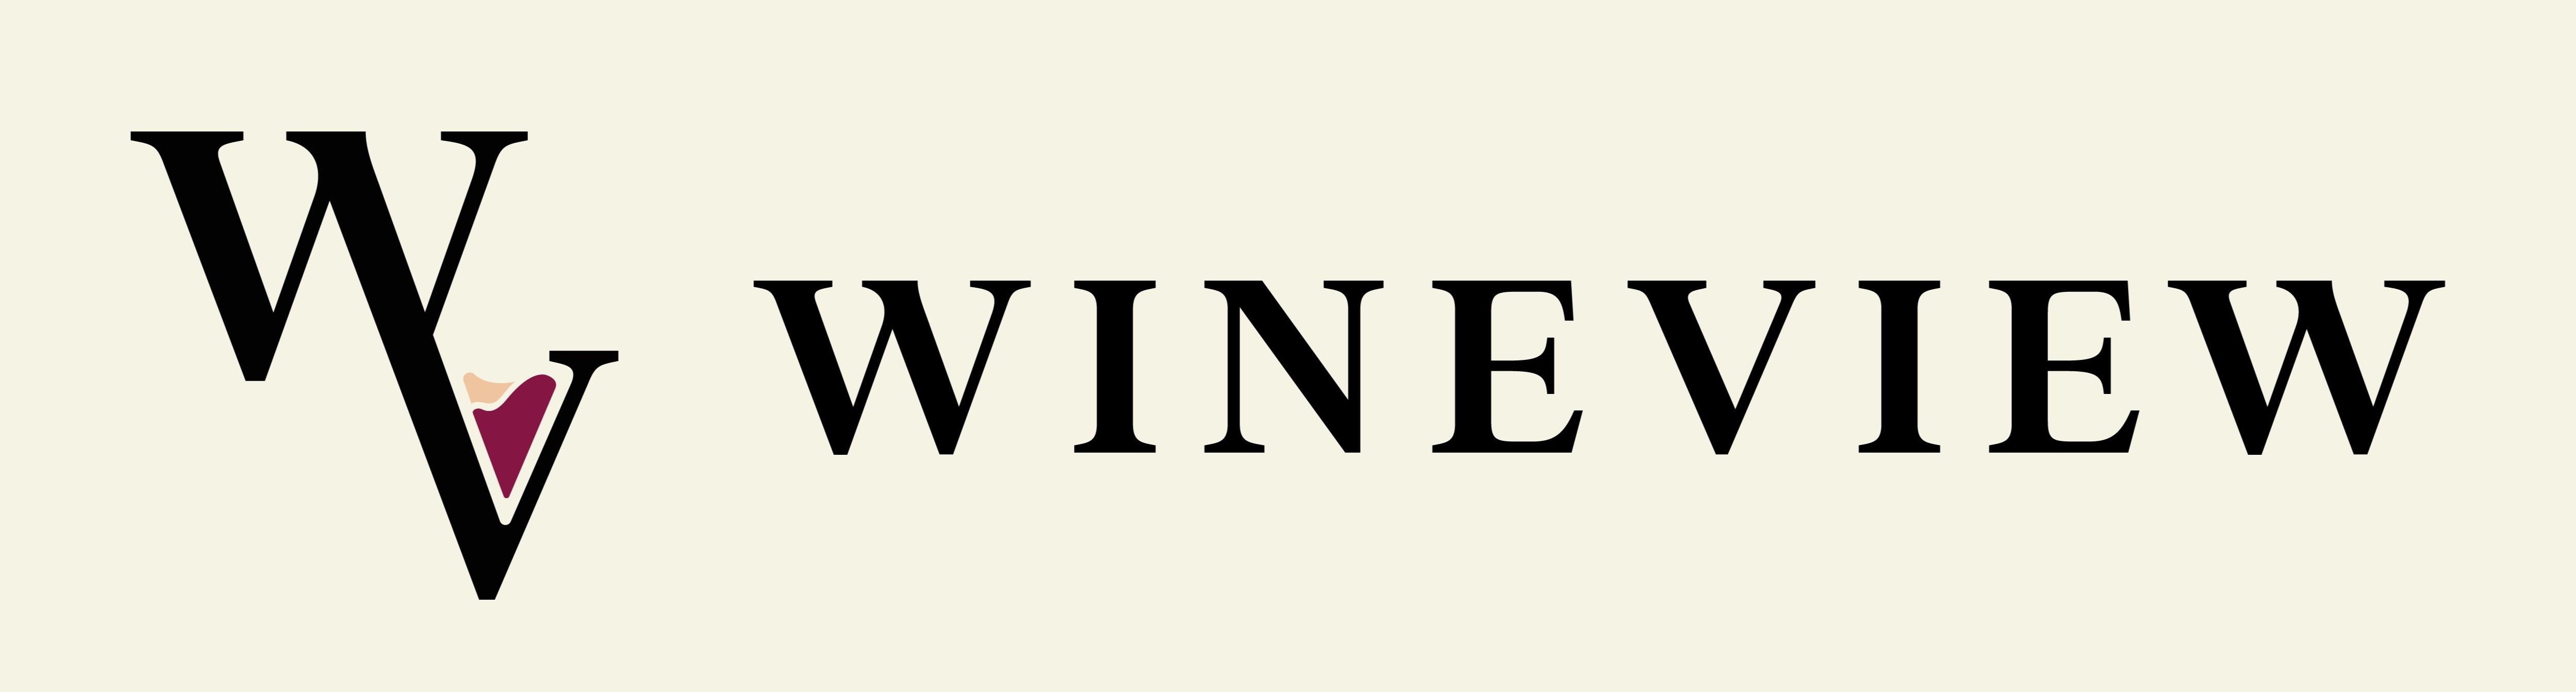 wineview_cover